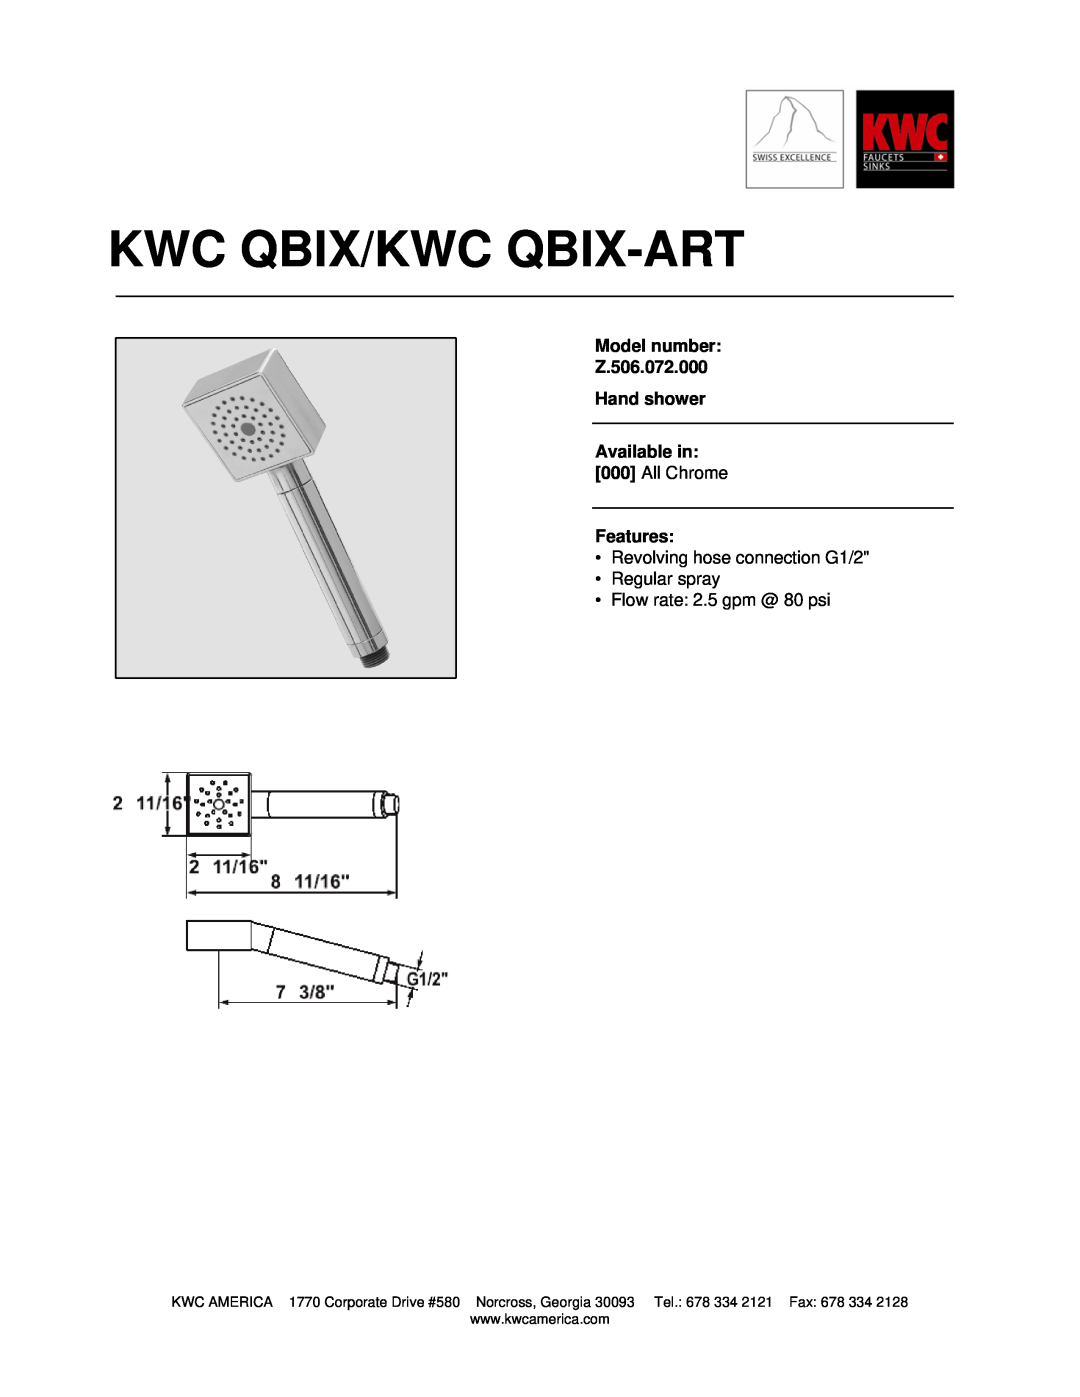 KWC manual Kwc Qbix/Kwc Qbix-Art, Model number Z.506.072.000 Hand shower, Available in, All Chrome, Features 